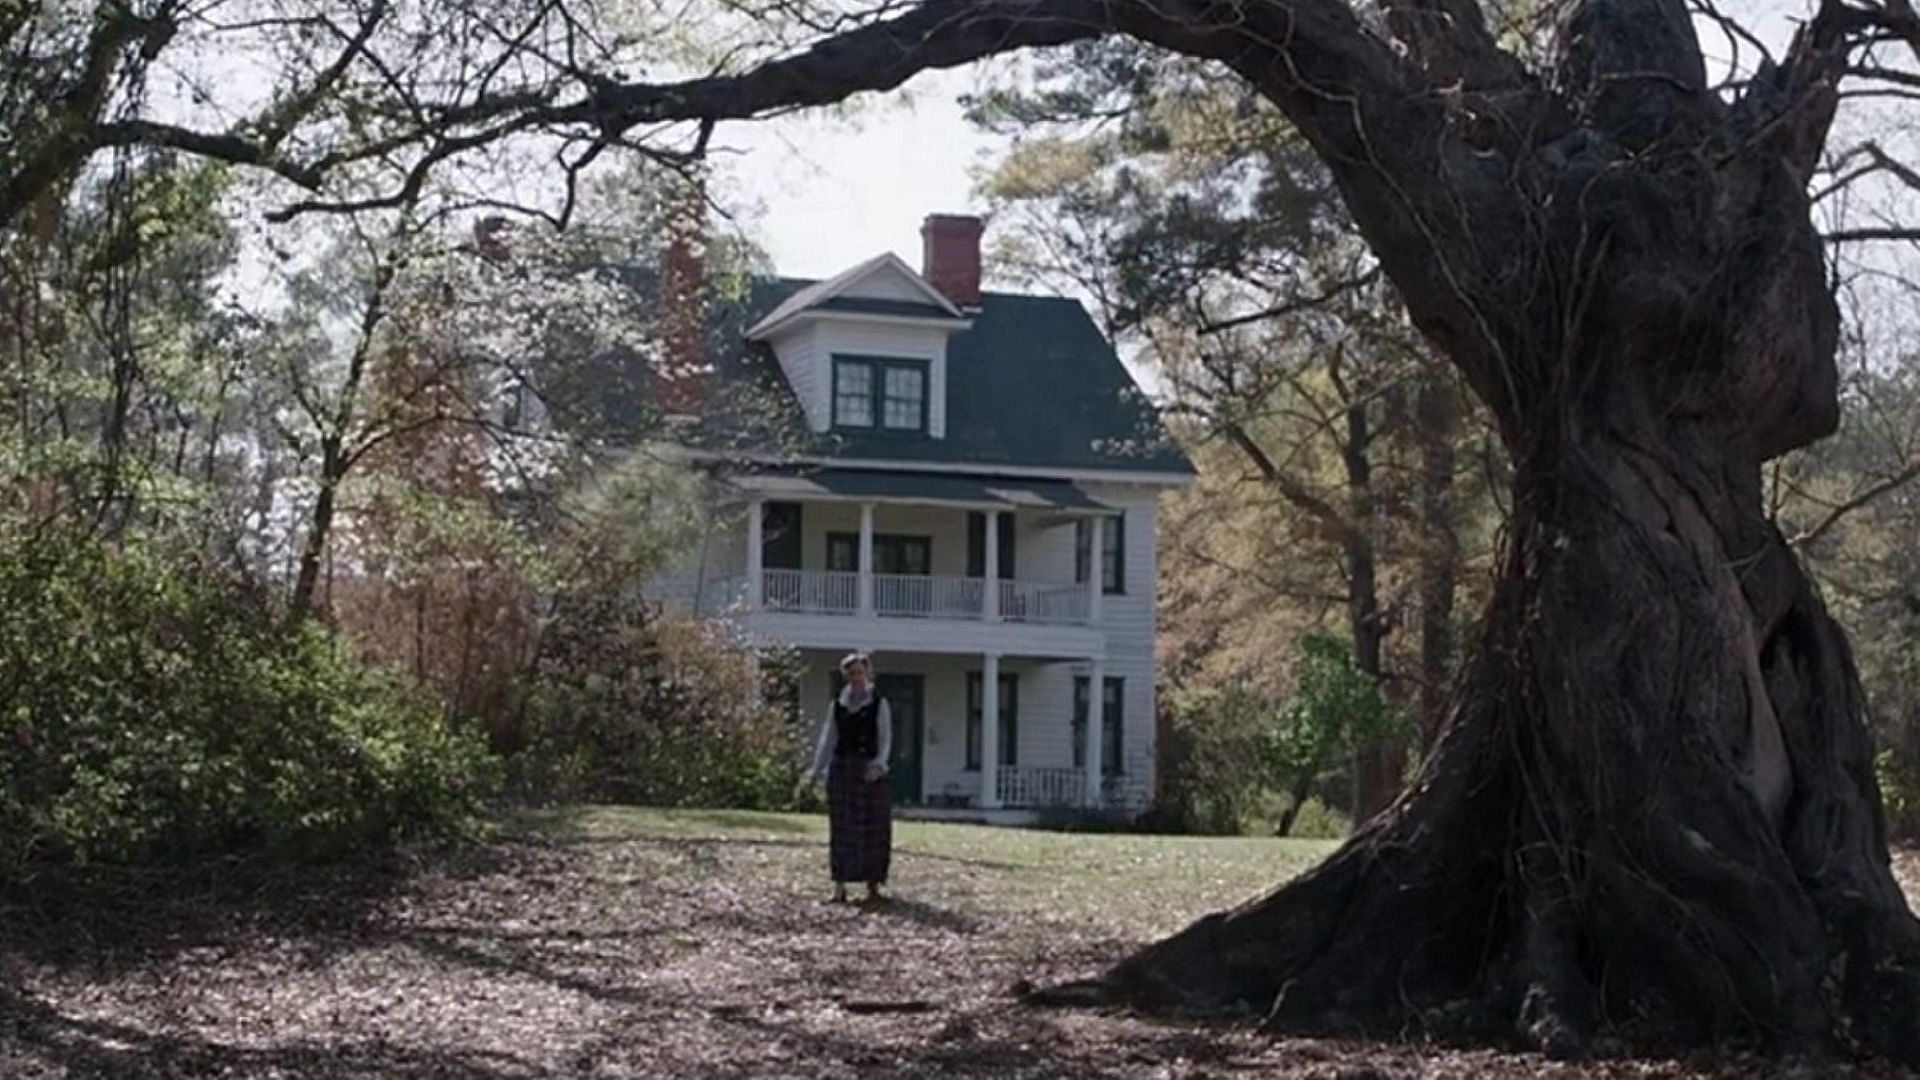 A still from Conjuring (Image via Warner Brothers)